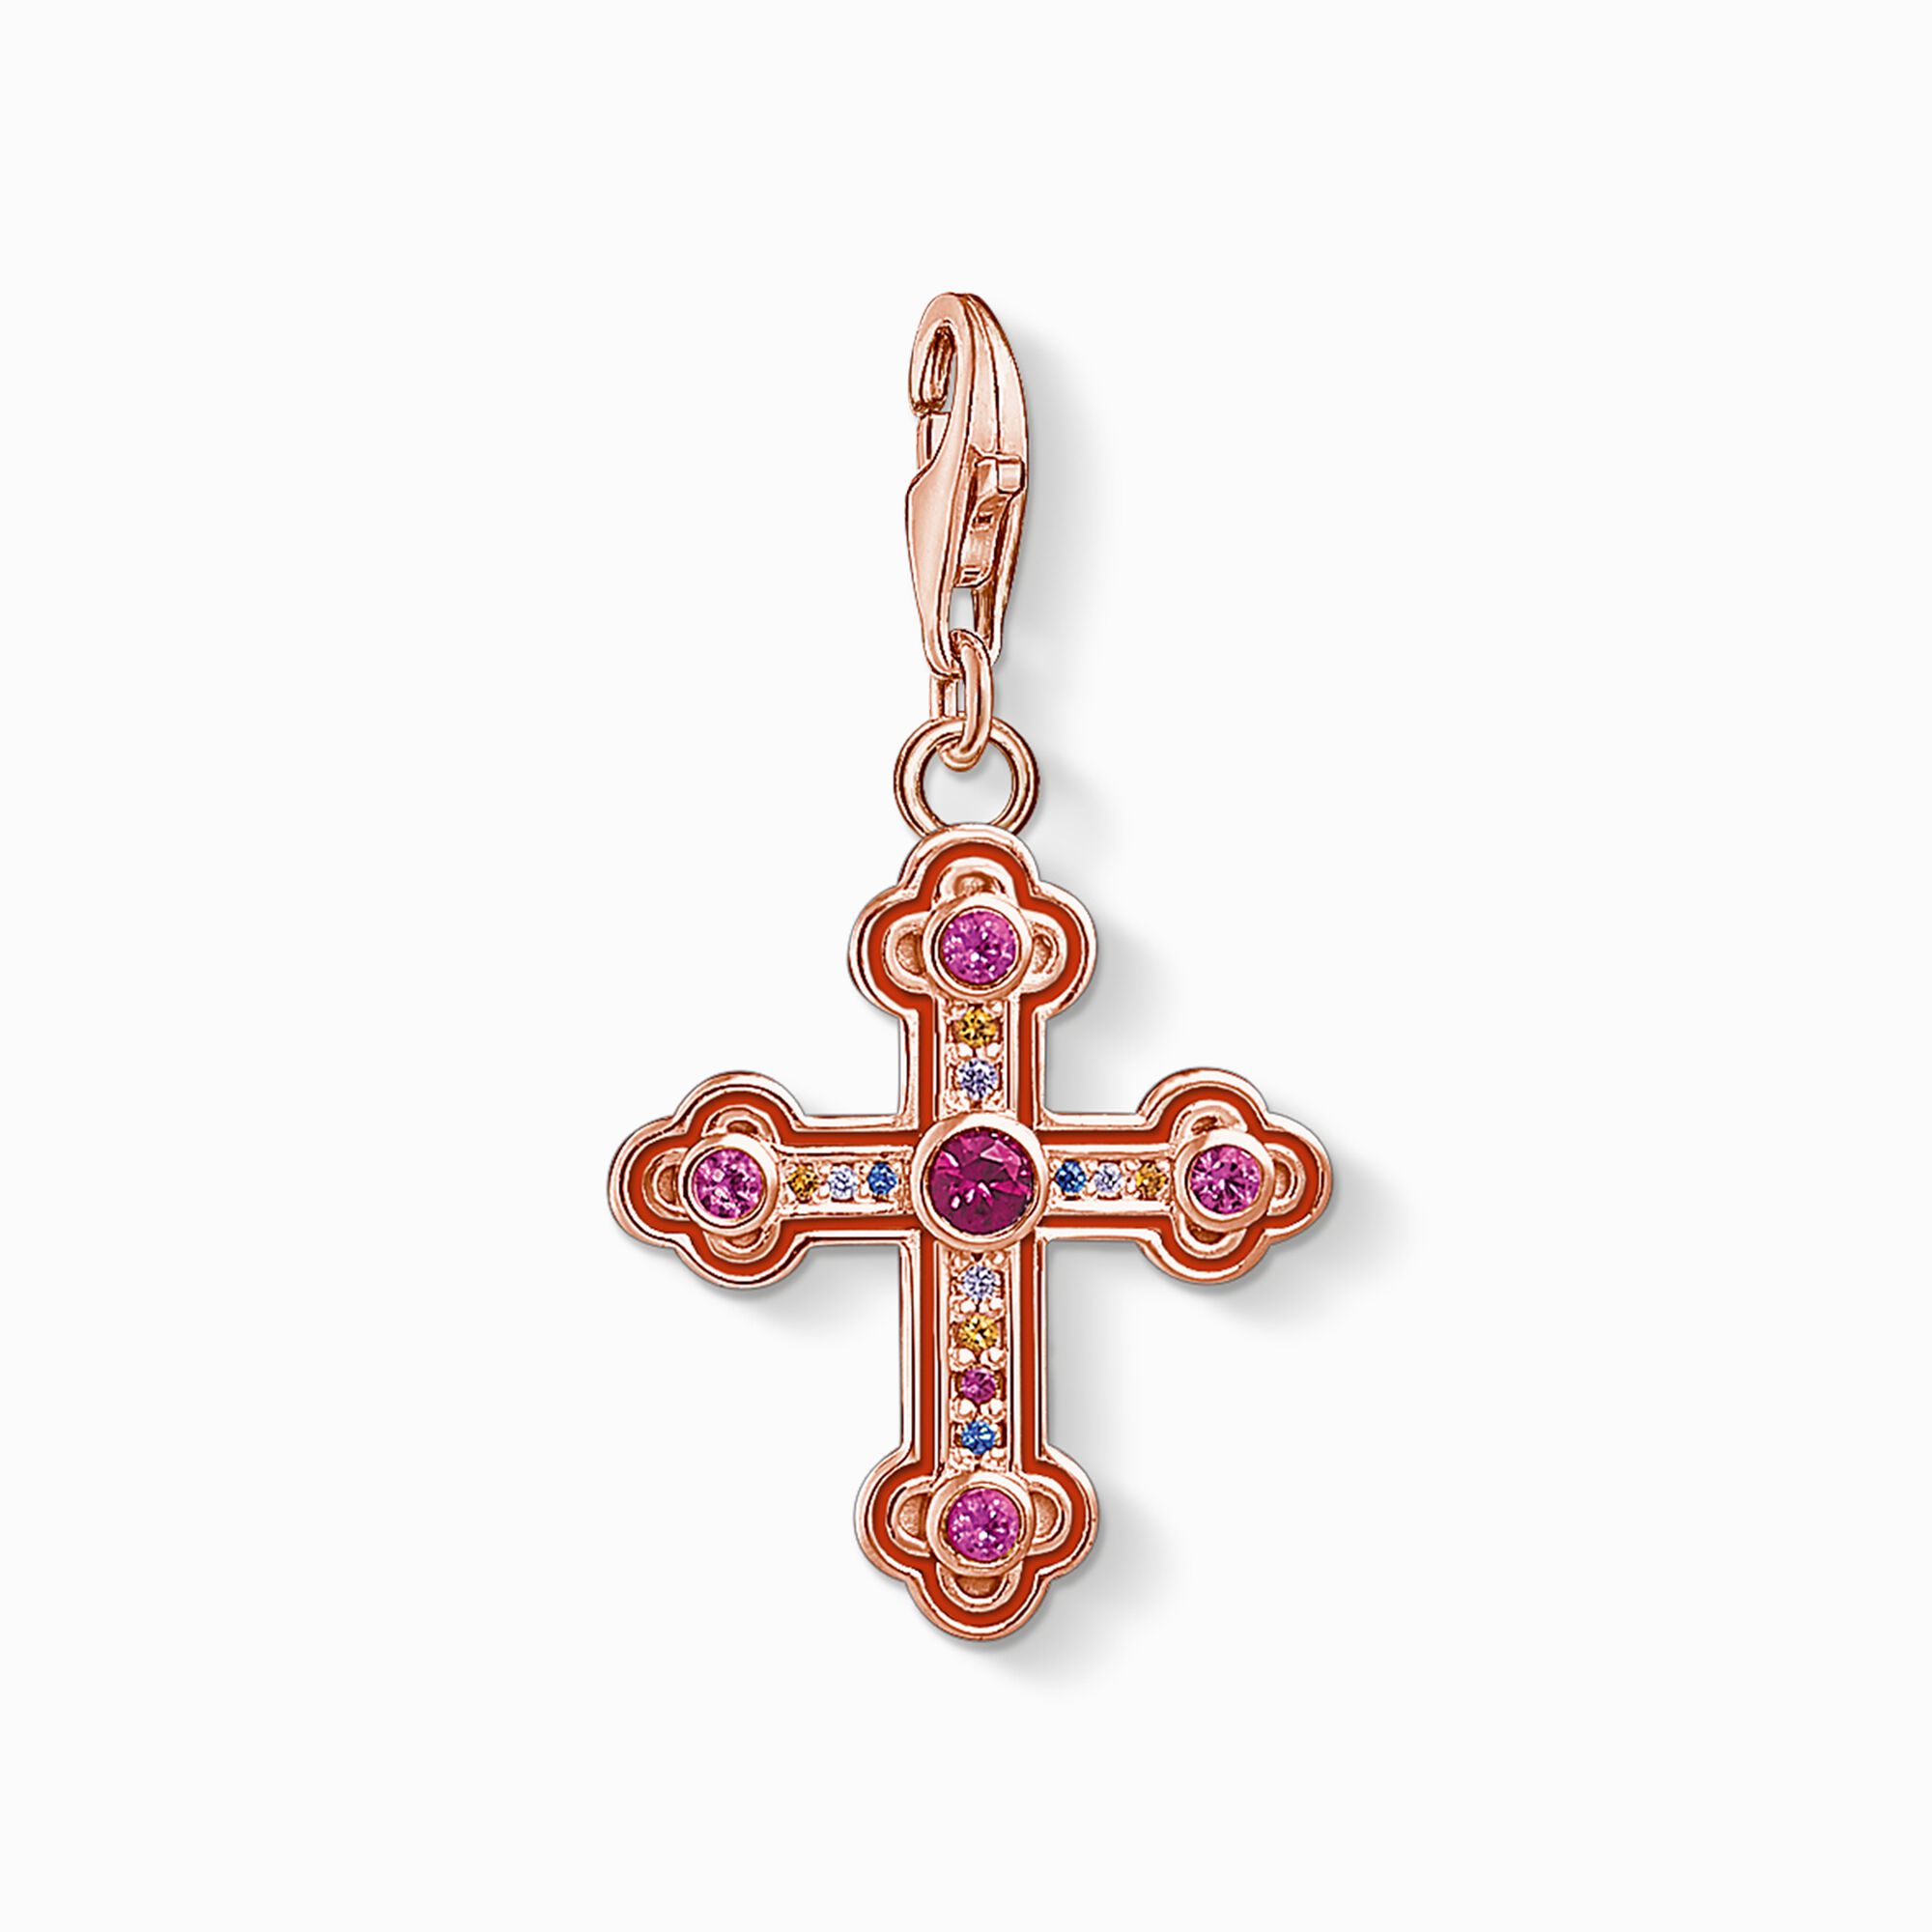 Charm pendant Iconic ornamental cross from the Charm Club collection in the THOMAS SABO online store